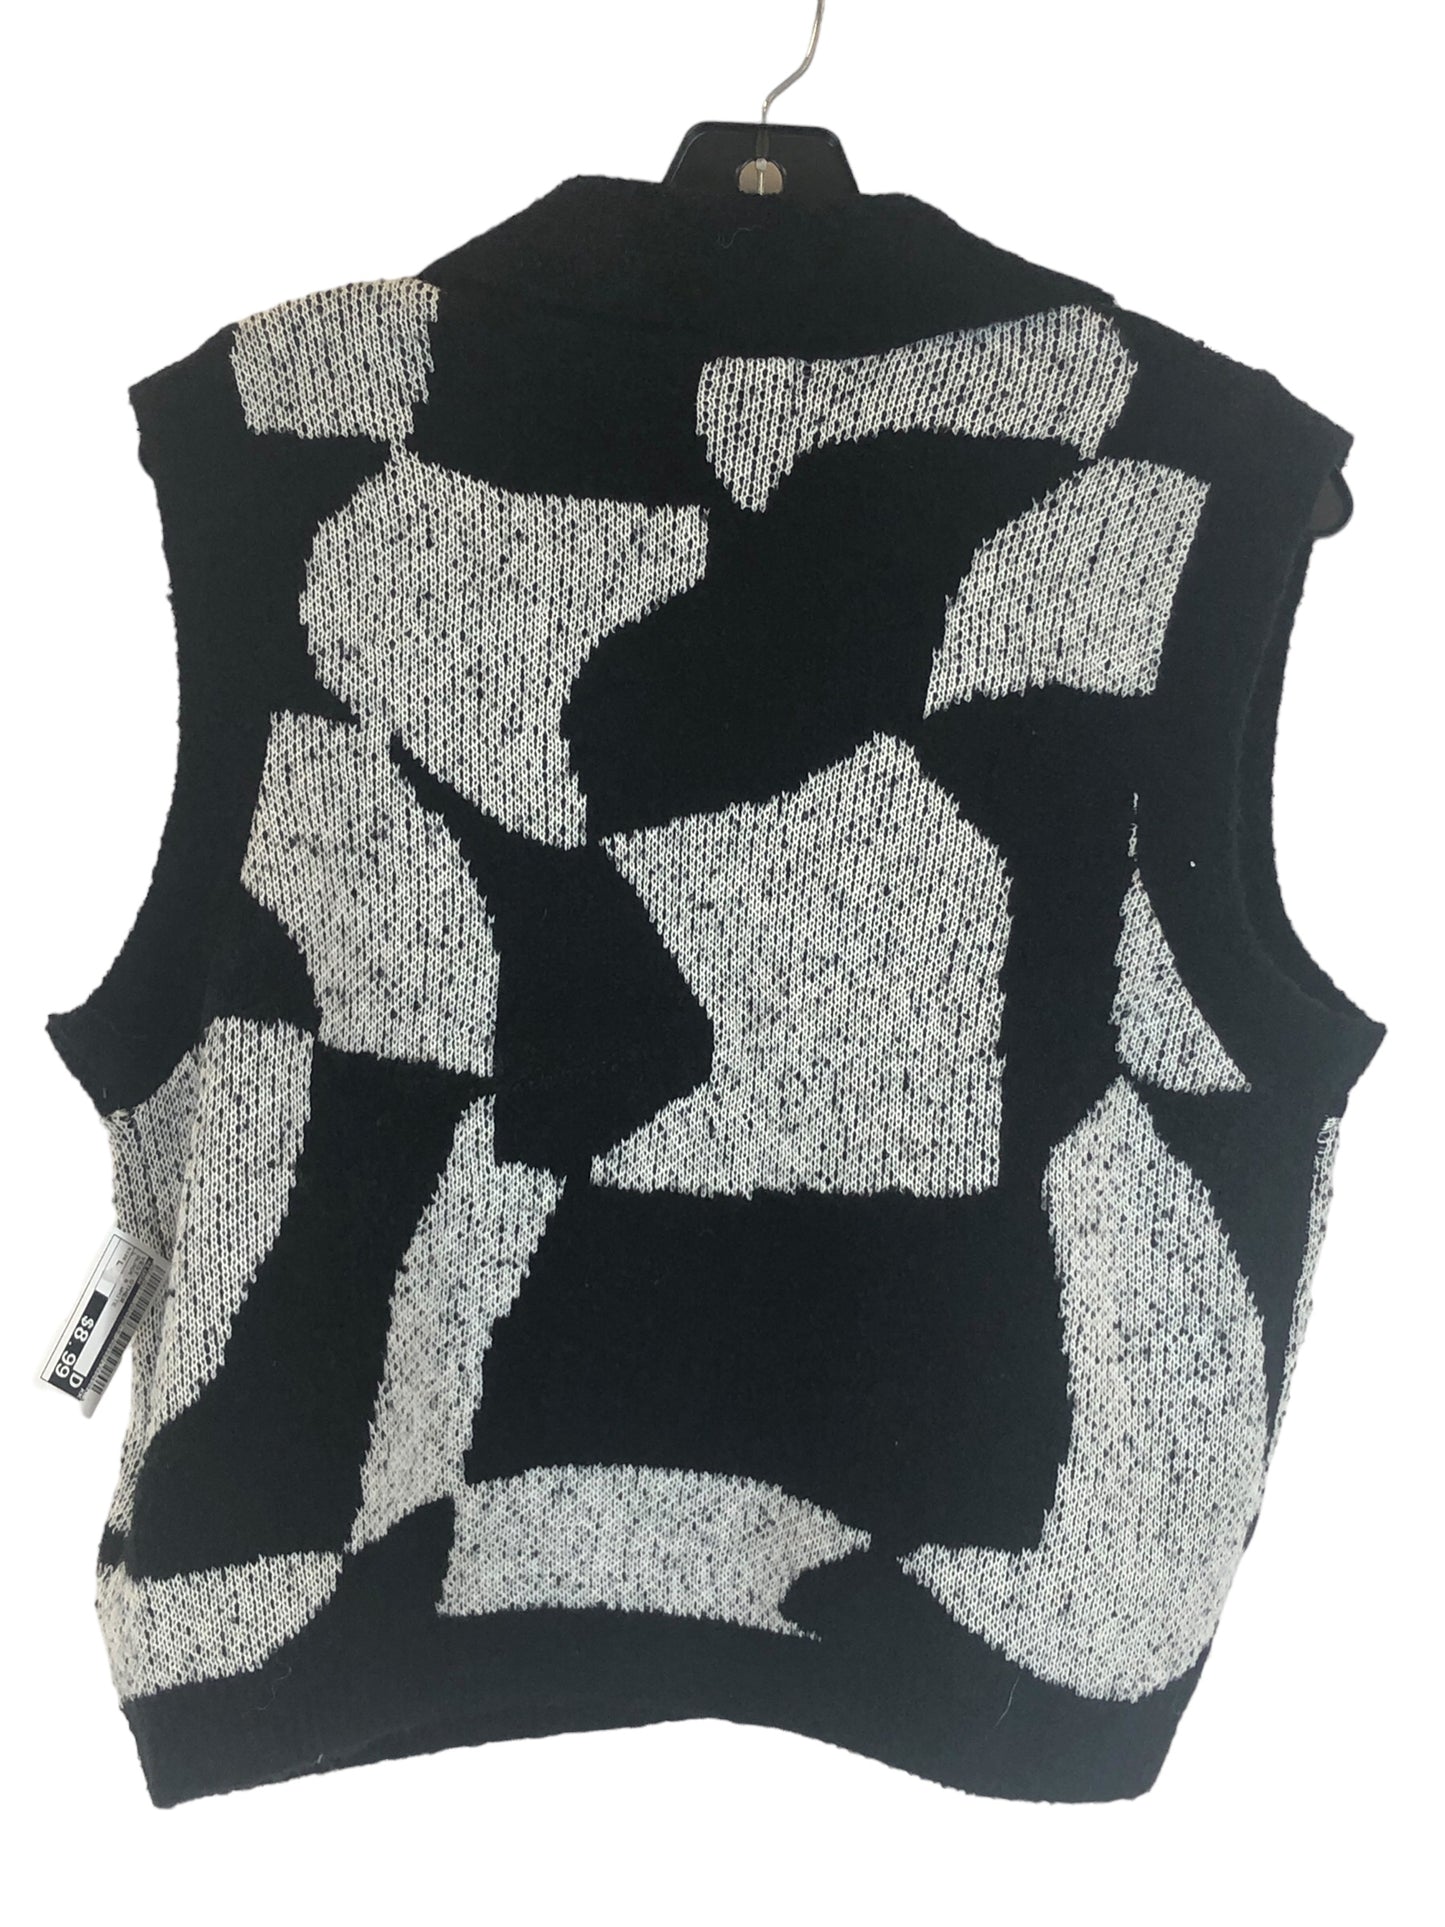 Vest Other By Lush  Size: L